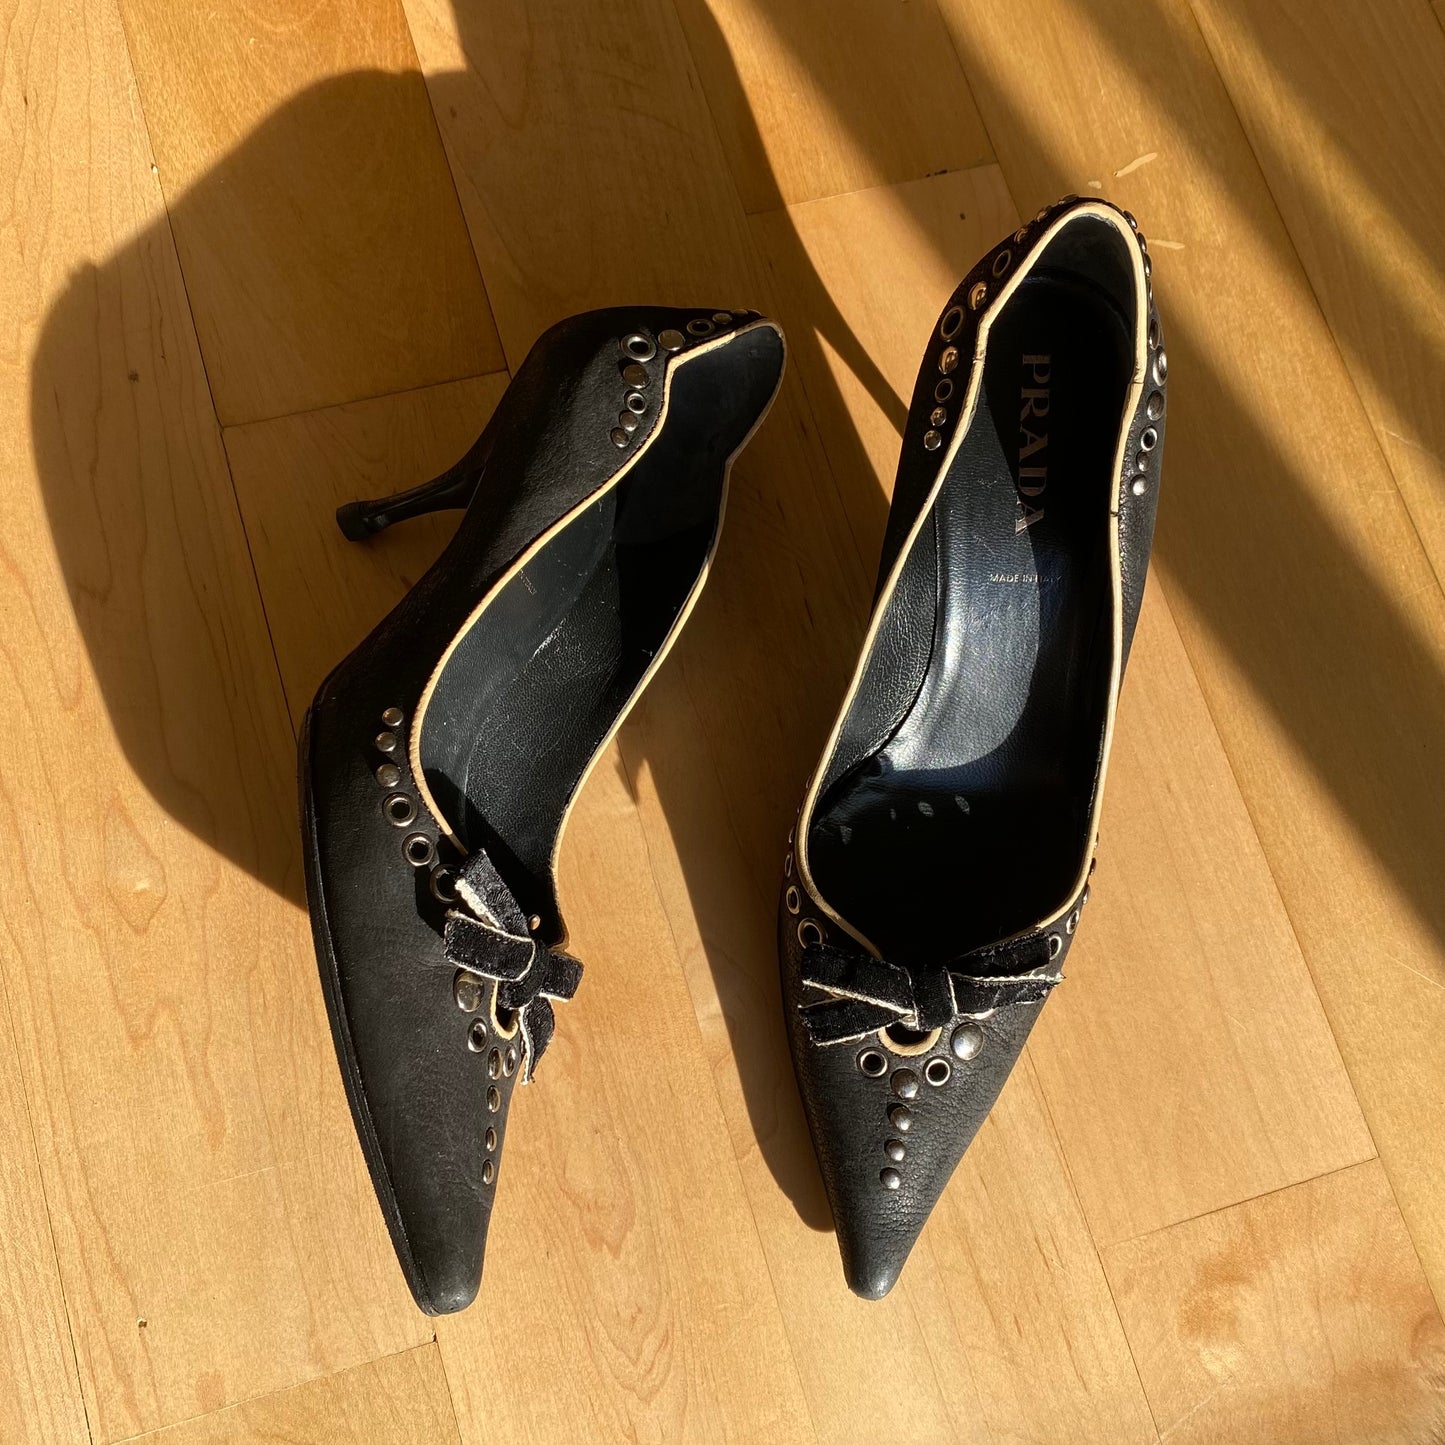 Prada 2001 Black Leather Bow Pointed Toe Pumps